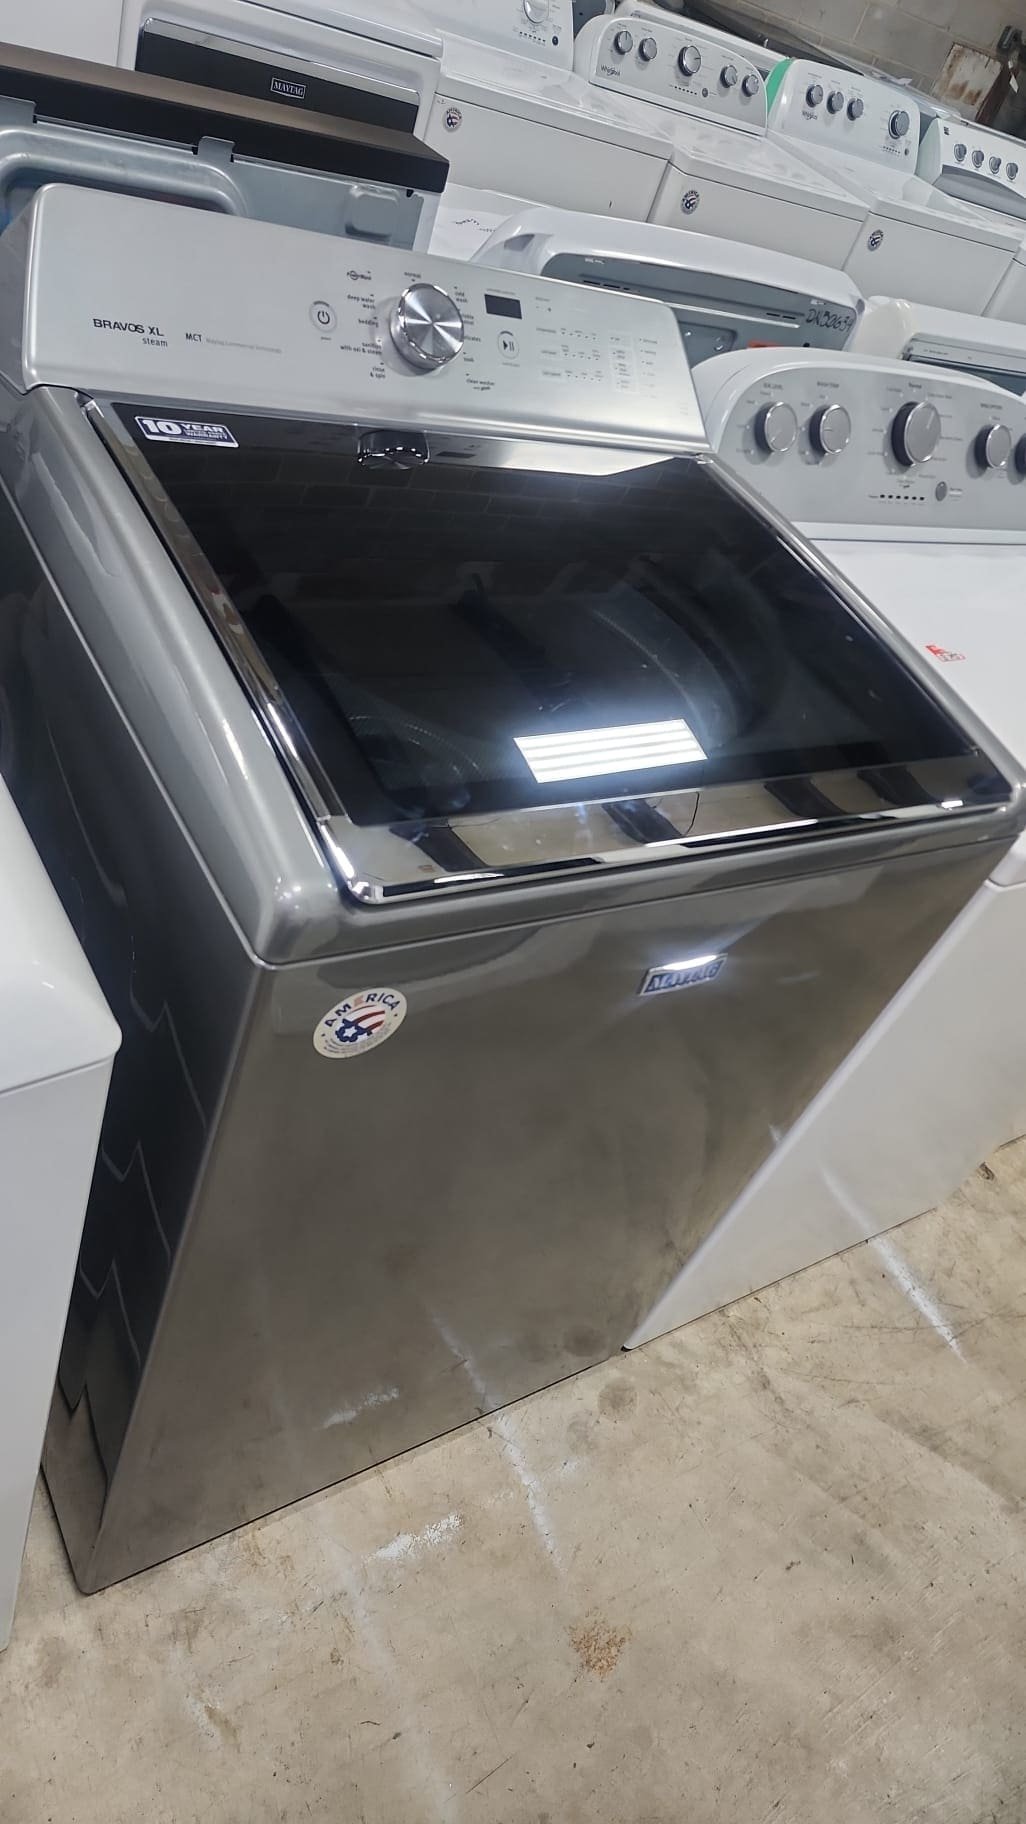 Maytag Used Top Load Washer – Black Stainless